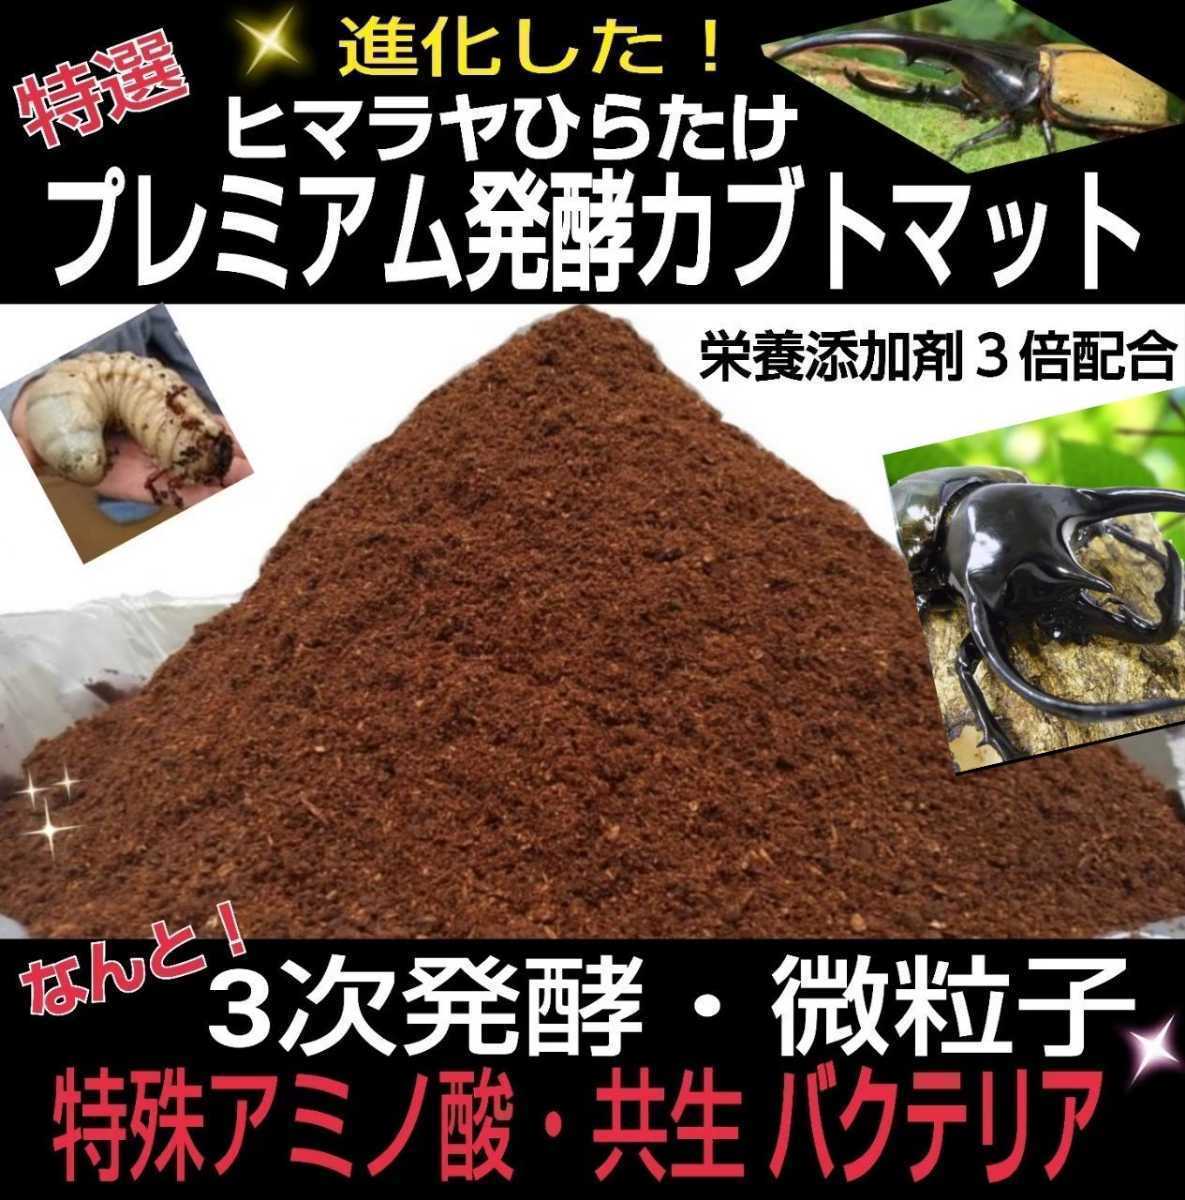  evolved! premium 3 next departure . rhinoceros beetle mat special amino acid * symbiosis bacteria nutrition addition agent .3 times combination did professional specification . insect ... not!